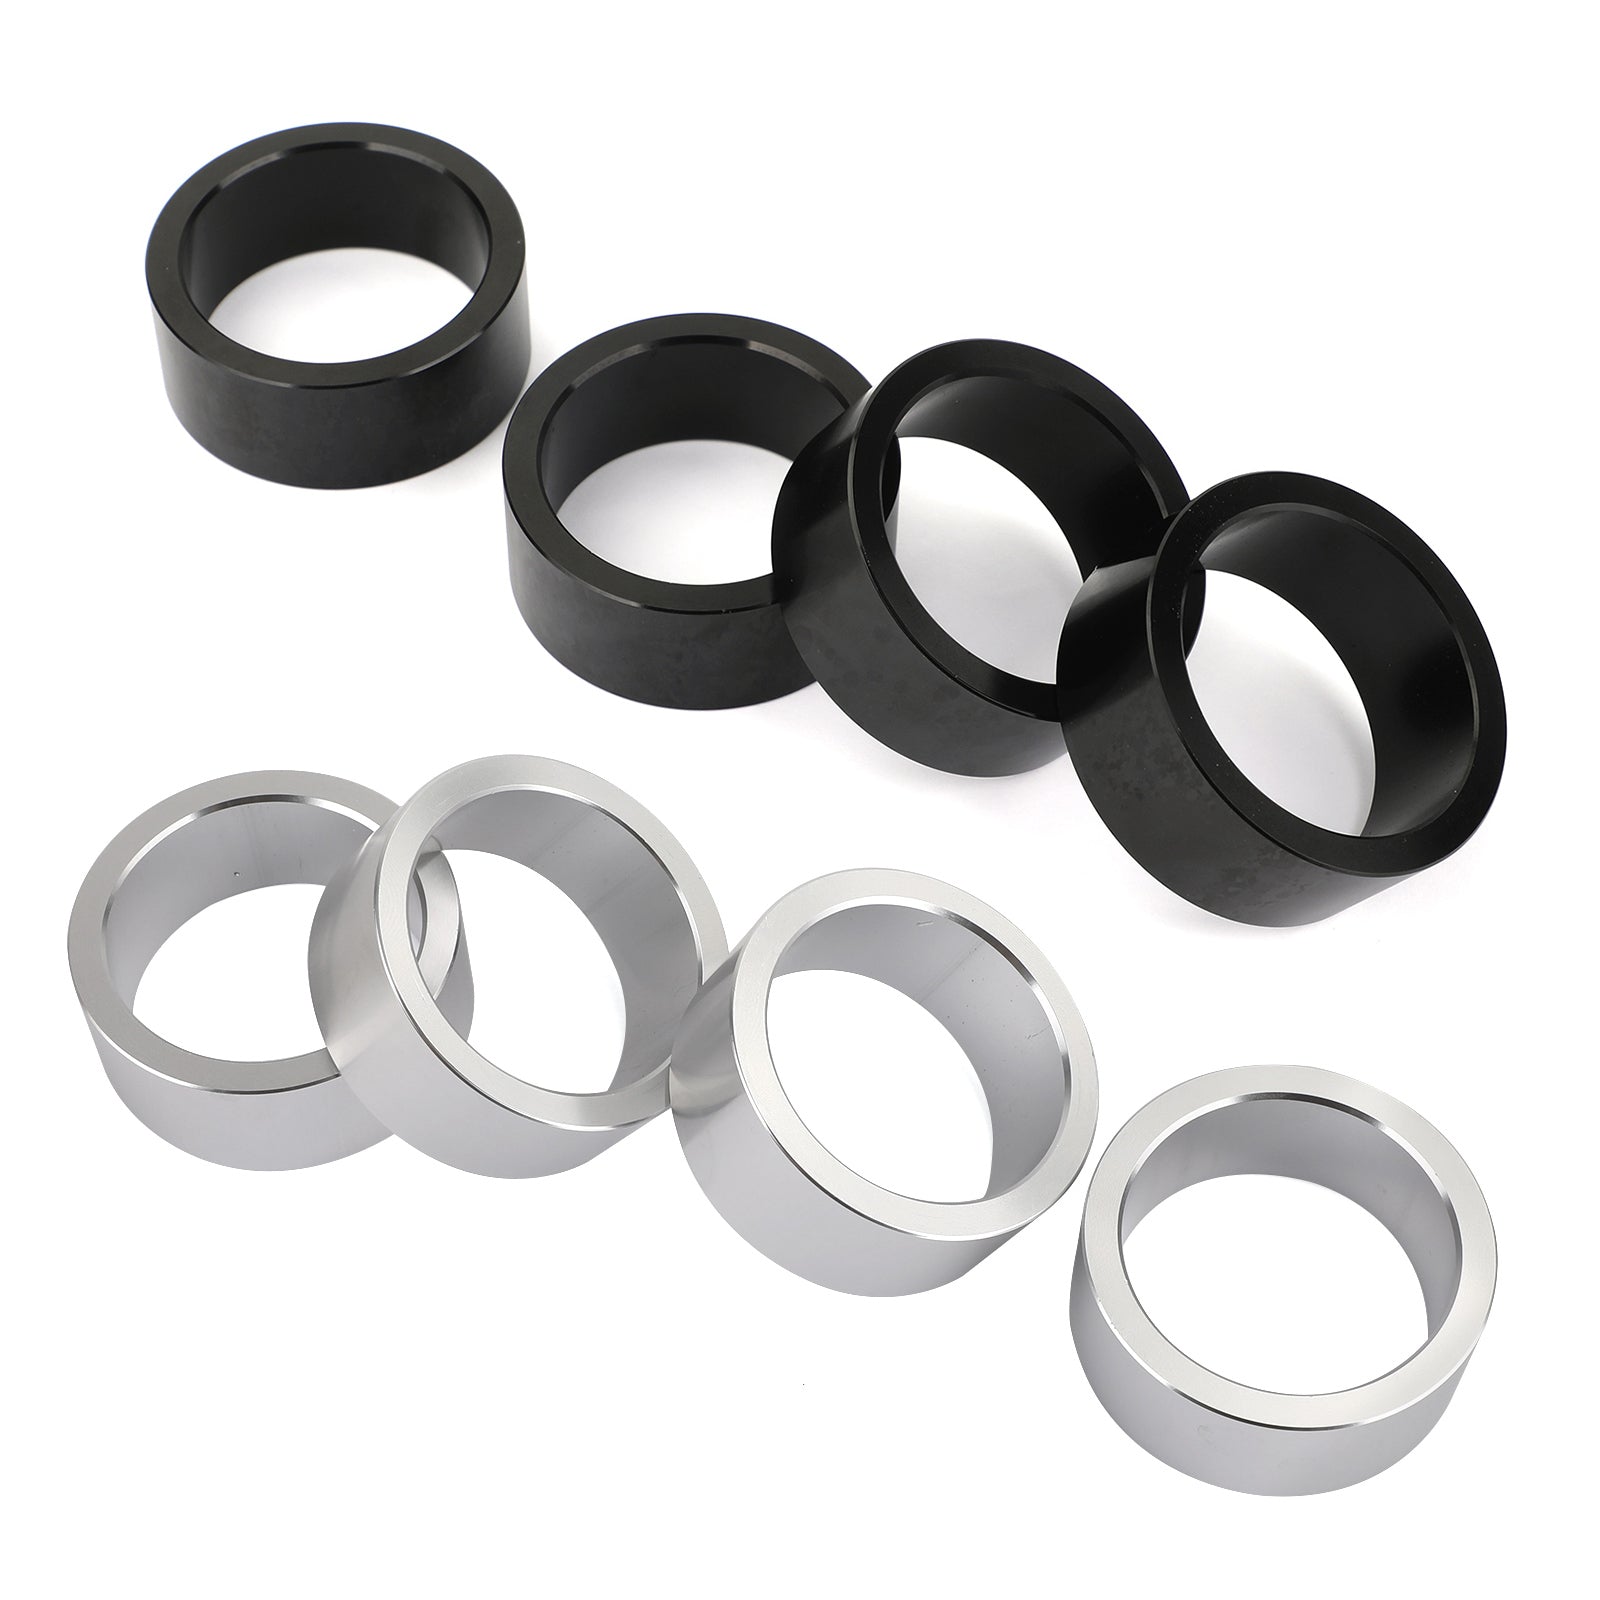 2.5inches Lift Spacer Kit fit for Honda Rancher Recon 230 250 300 350 400 420 ATV